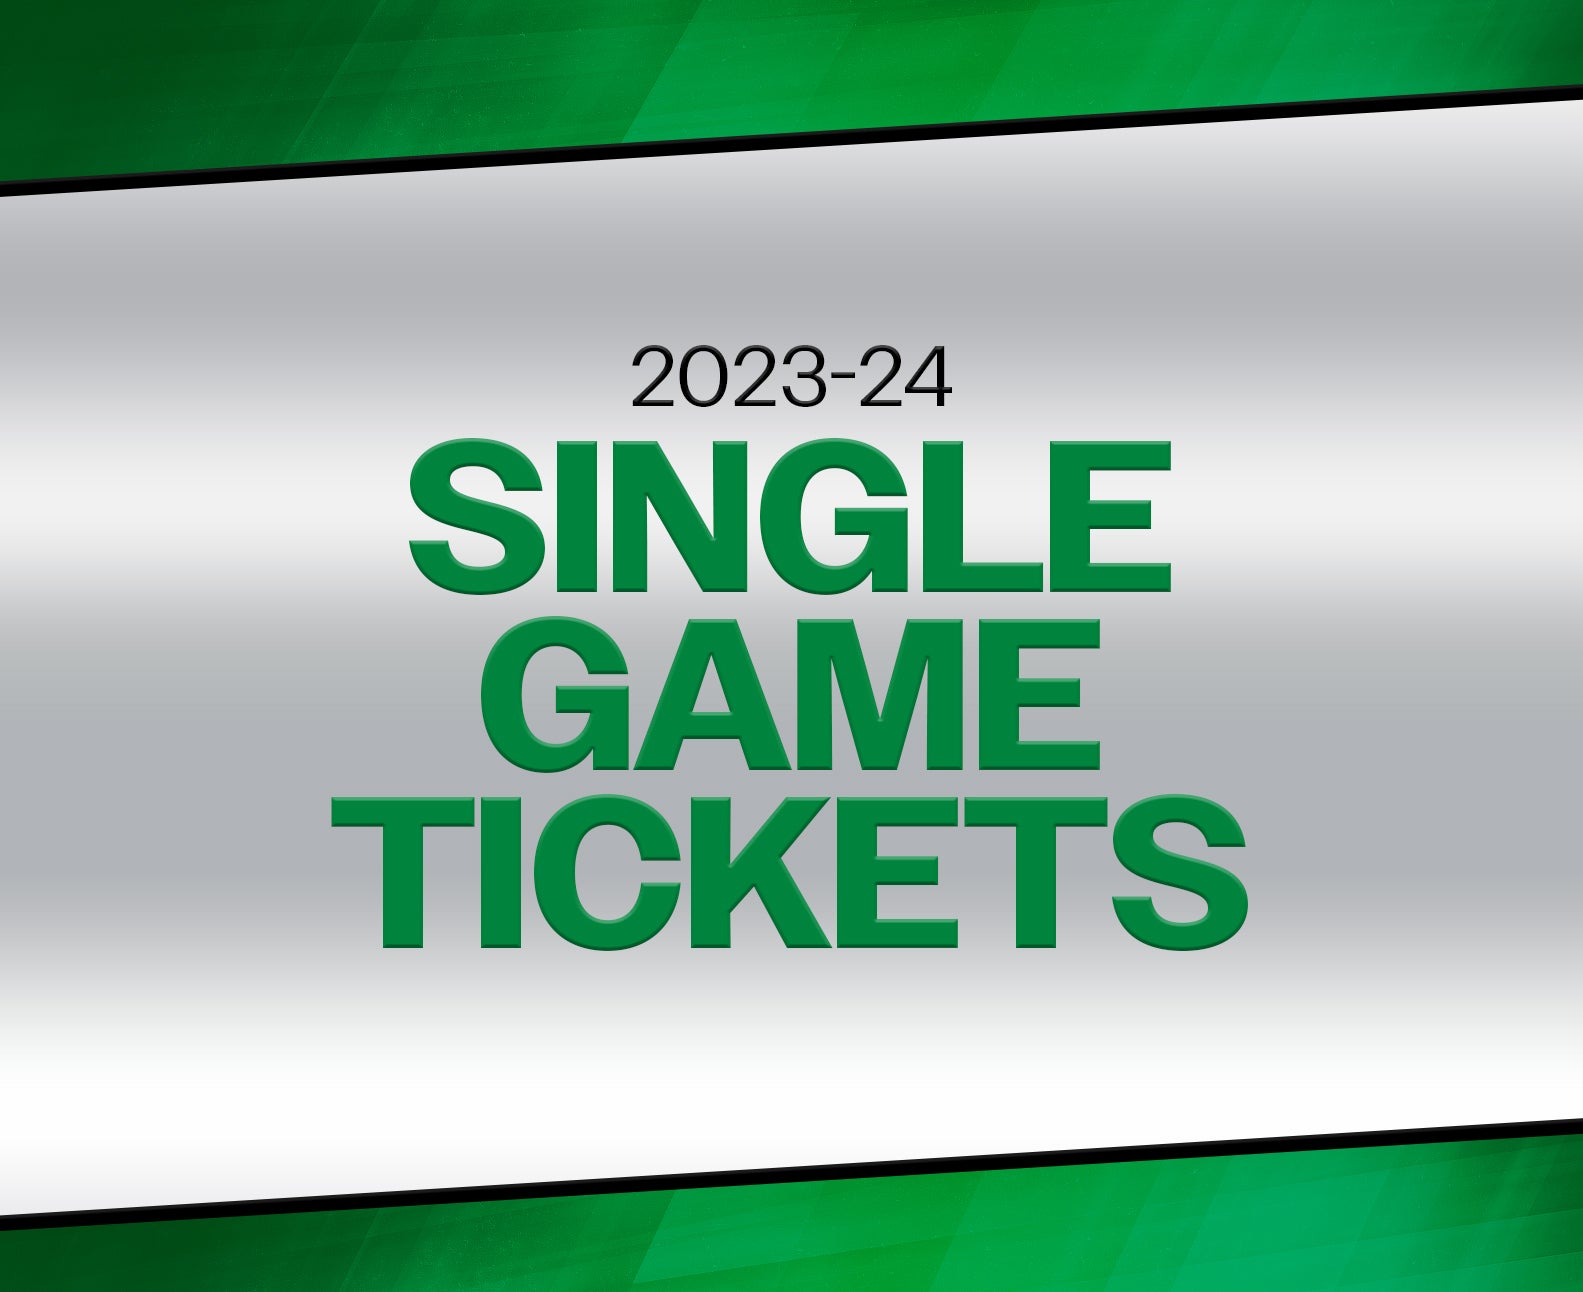 Canucks - Single Game Tickets On Sale